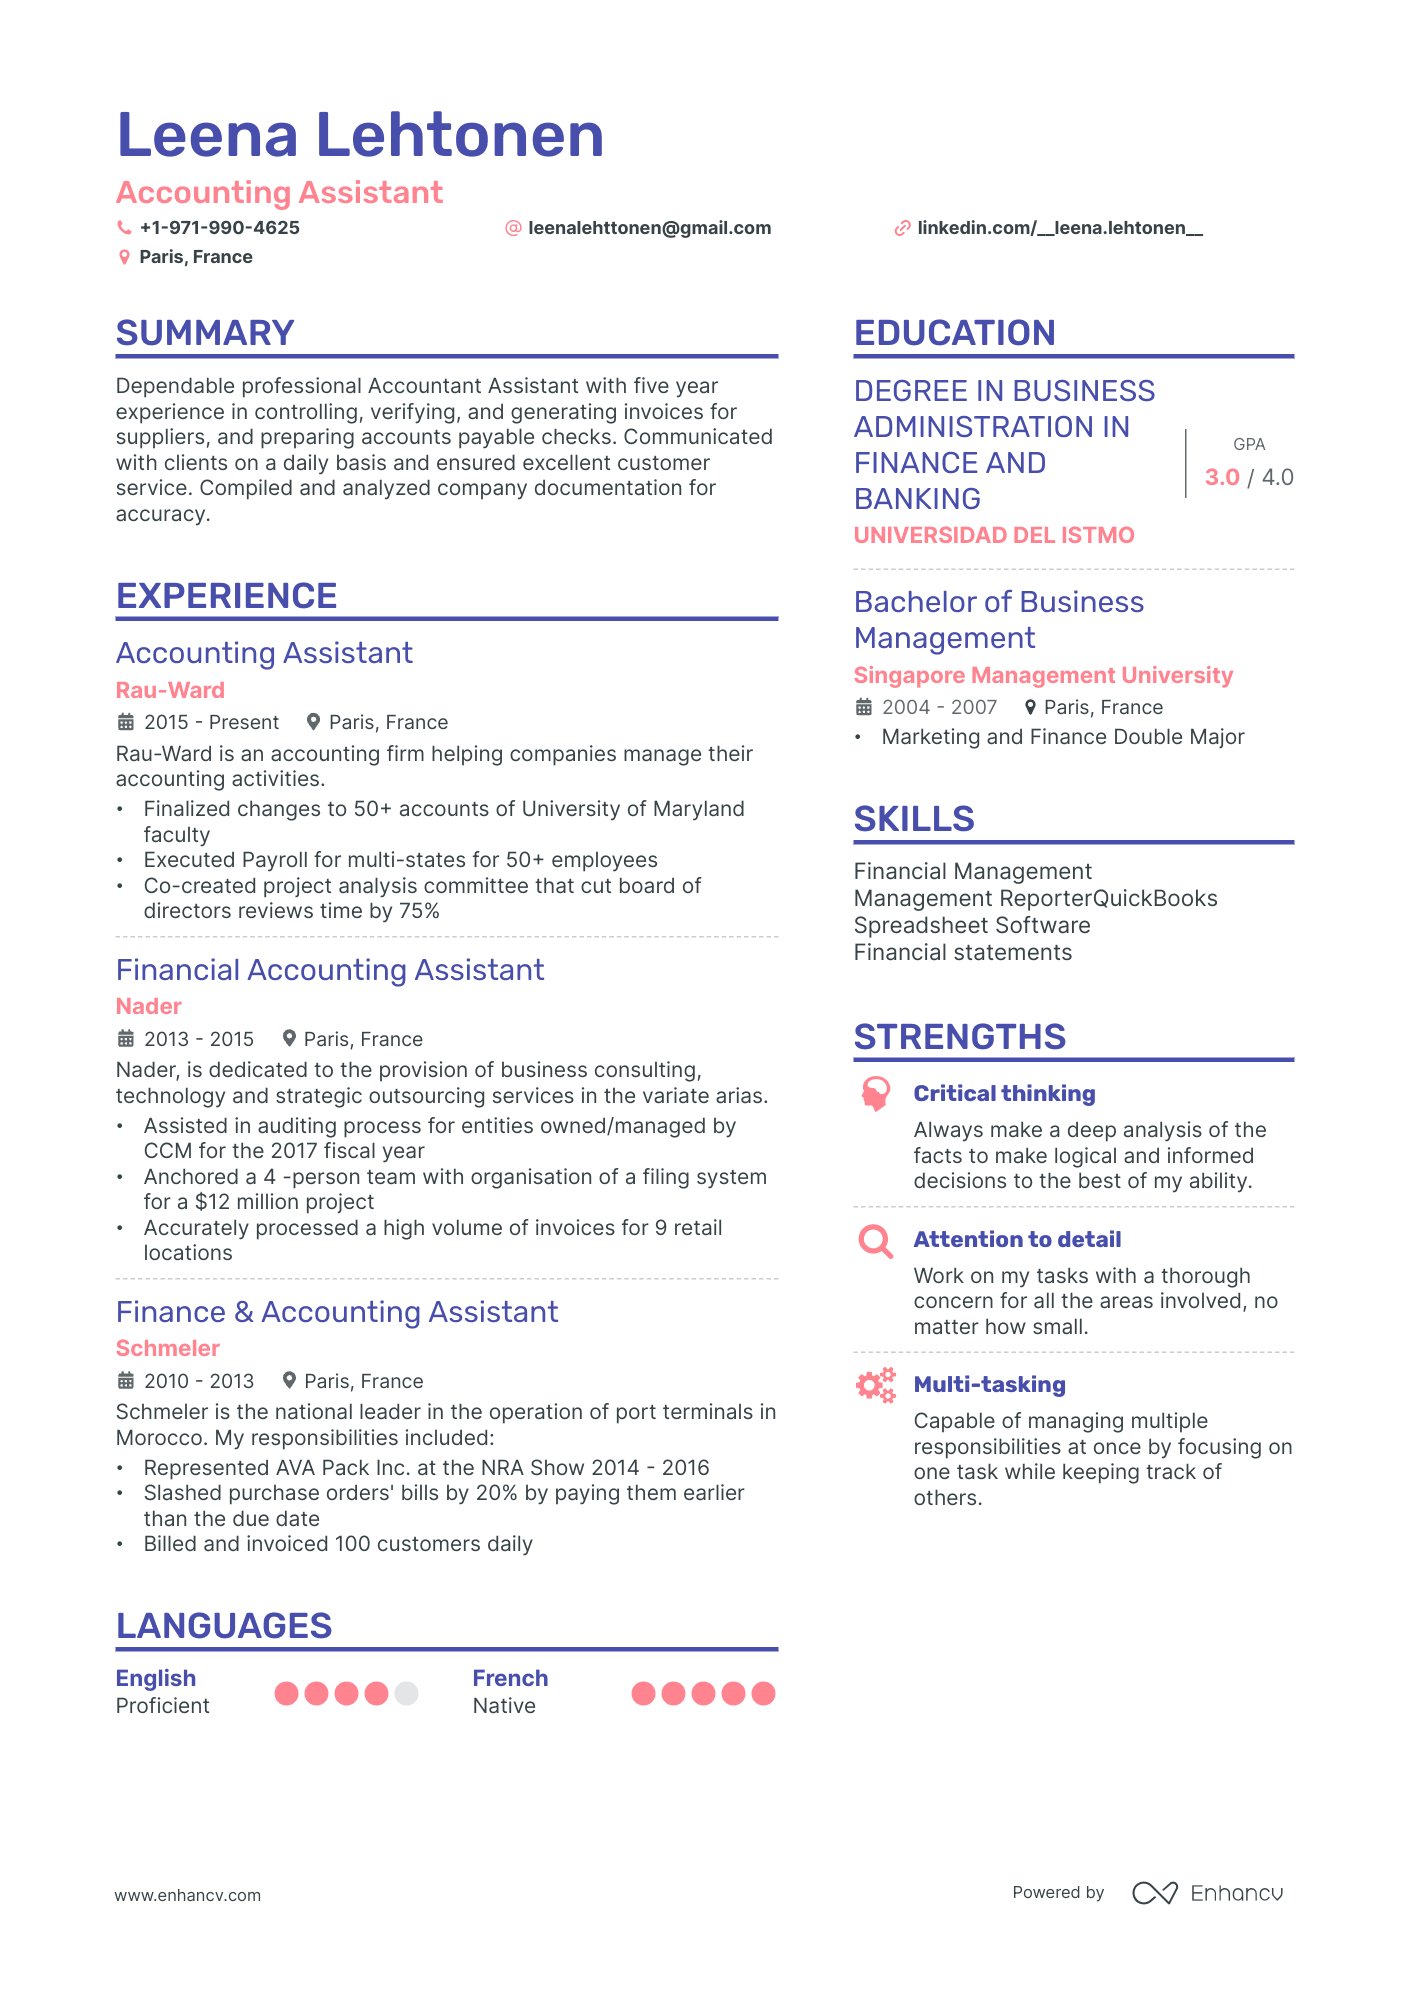 Accounting Assistant cover letter